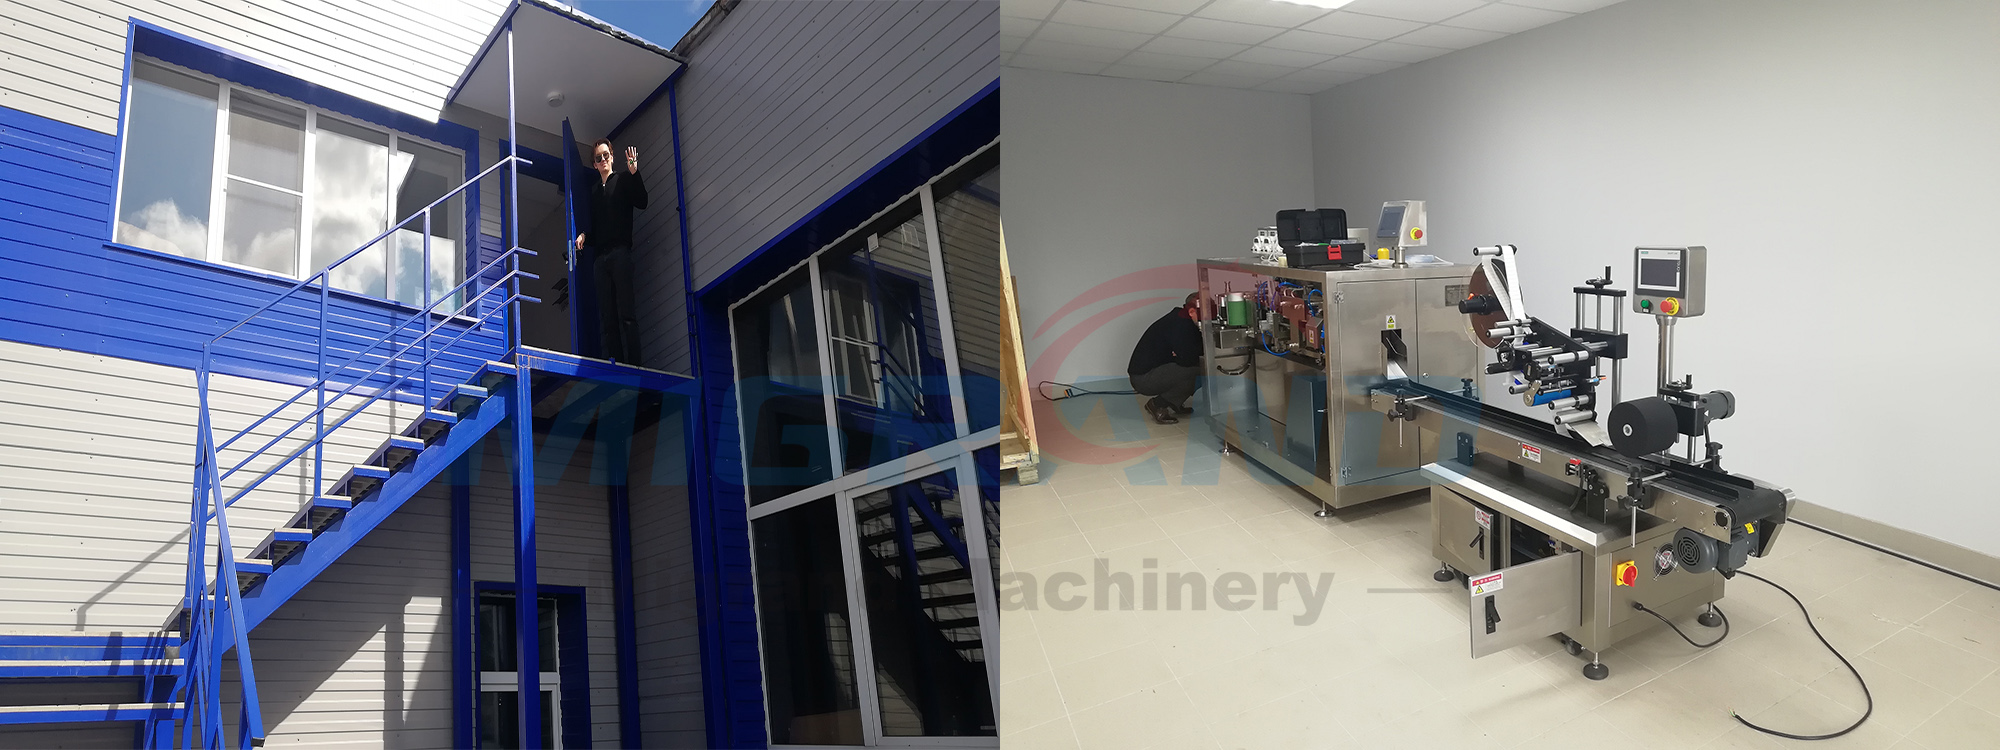 On-site service of packaging machinery